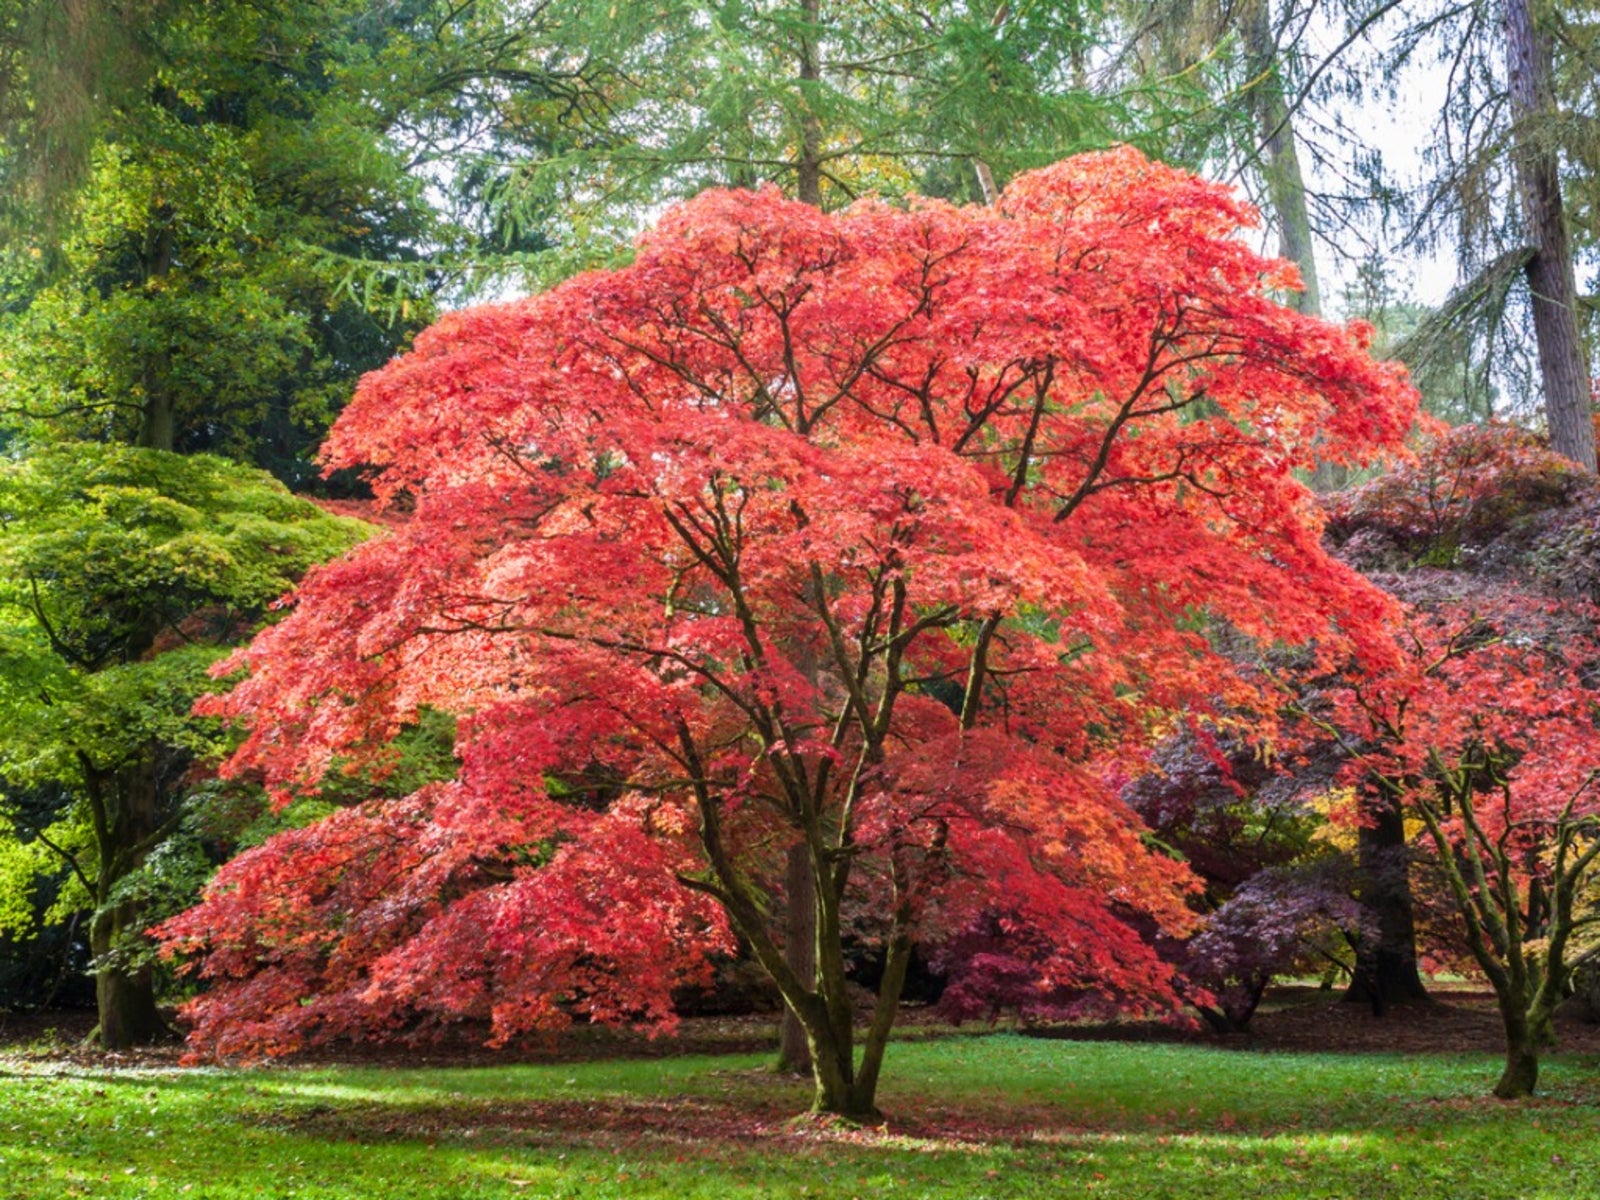 planting a japanese maple tree: tips on growing and caring for